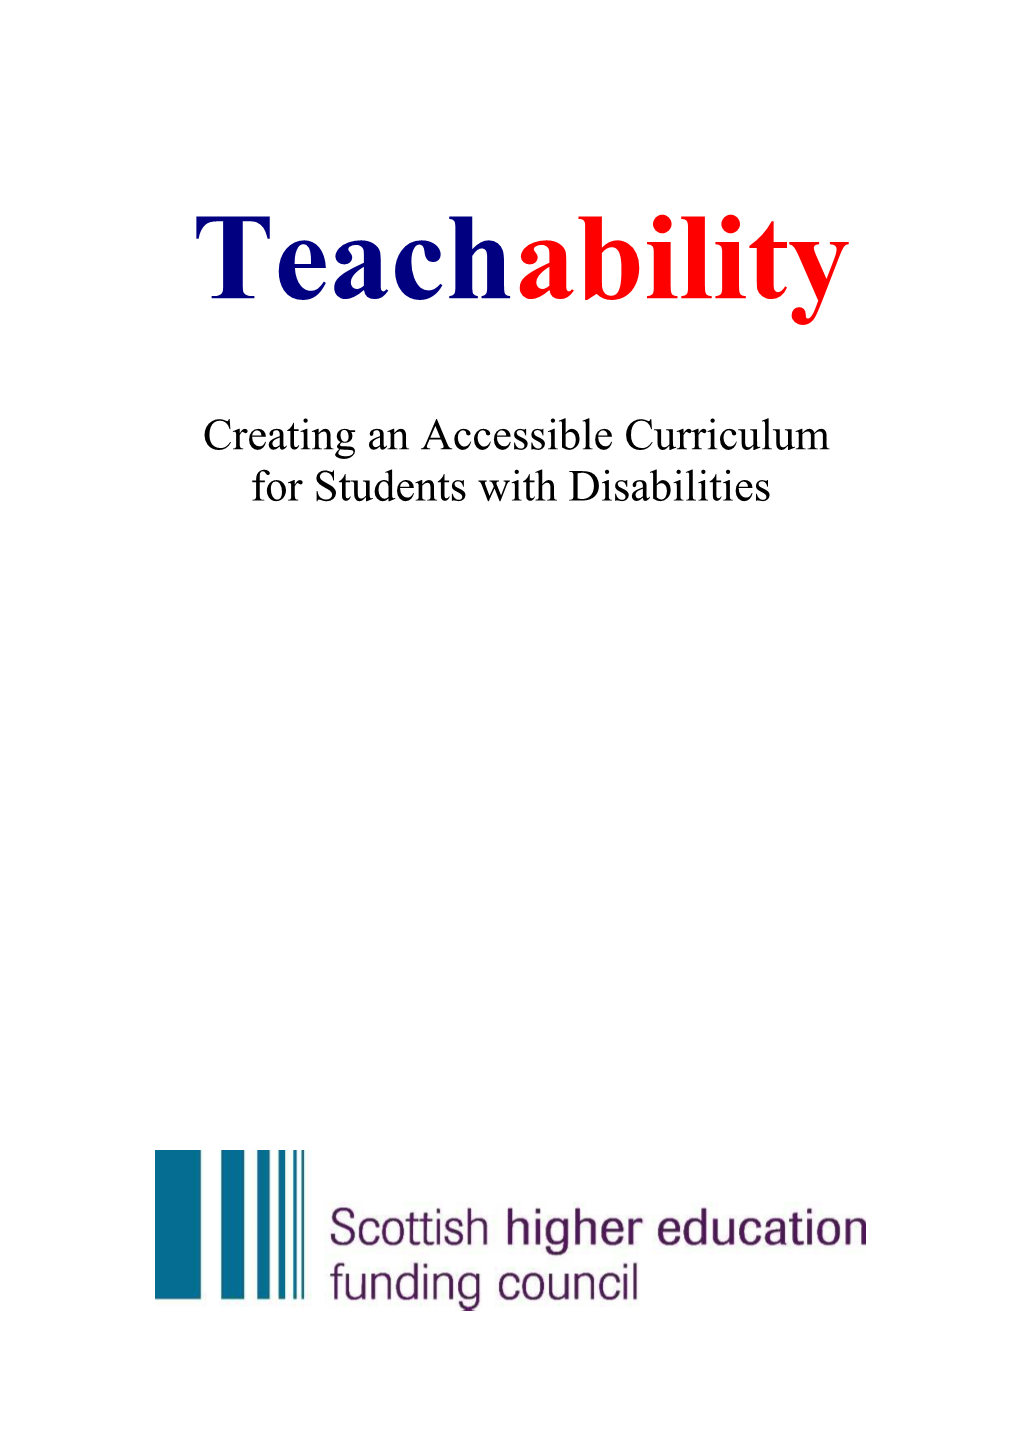 Creating an Accessible Curriculum for Students with Disabilities